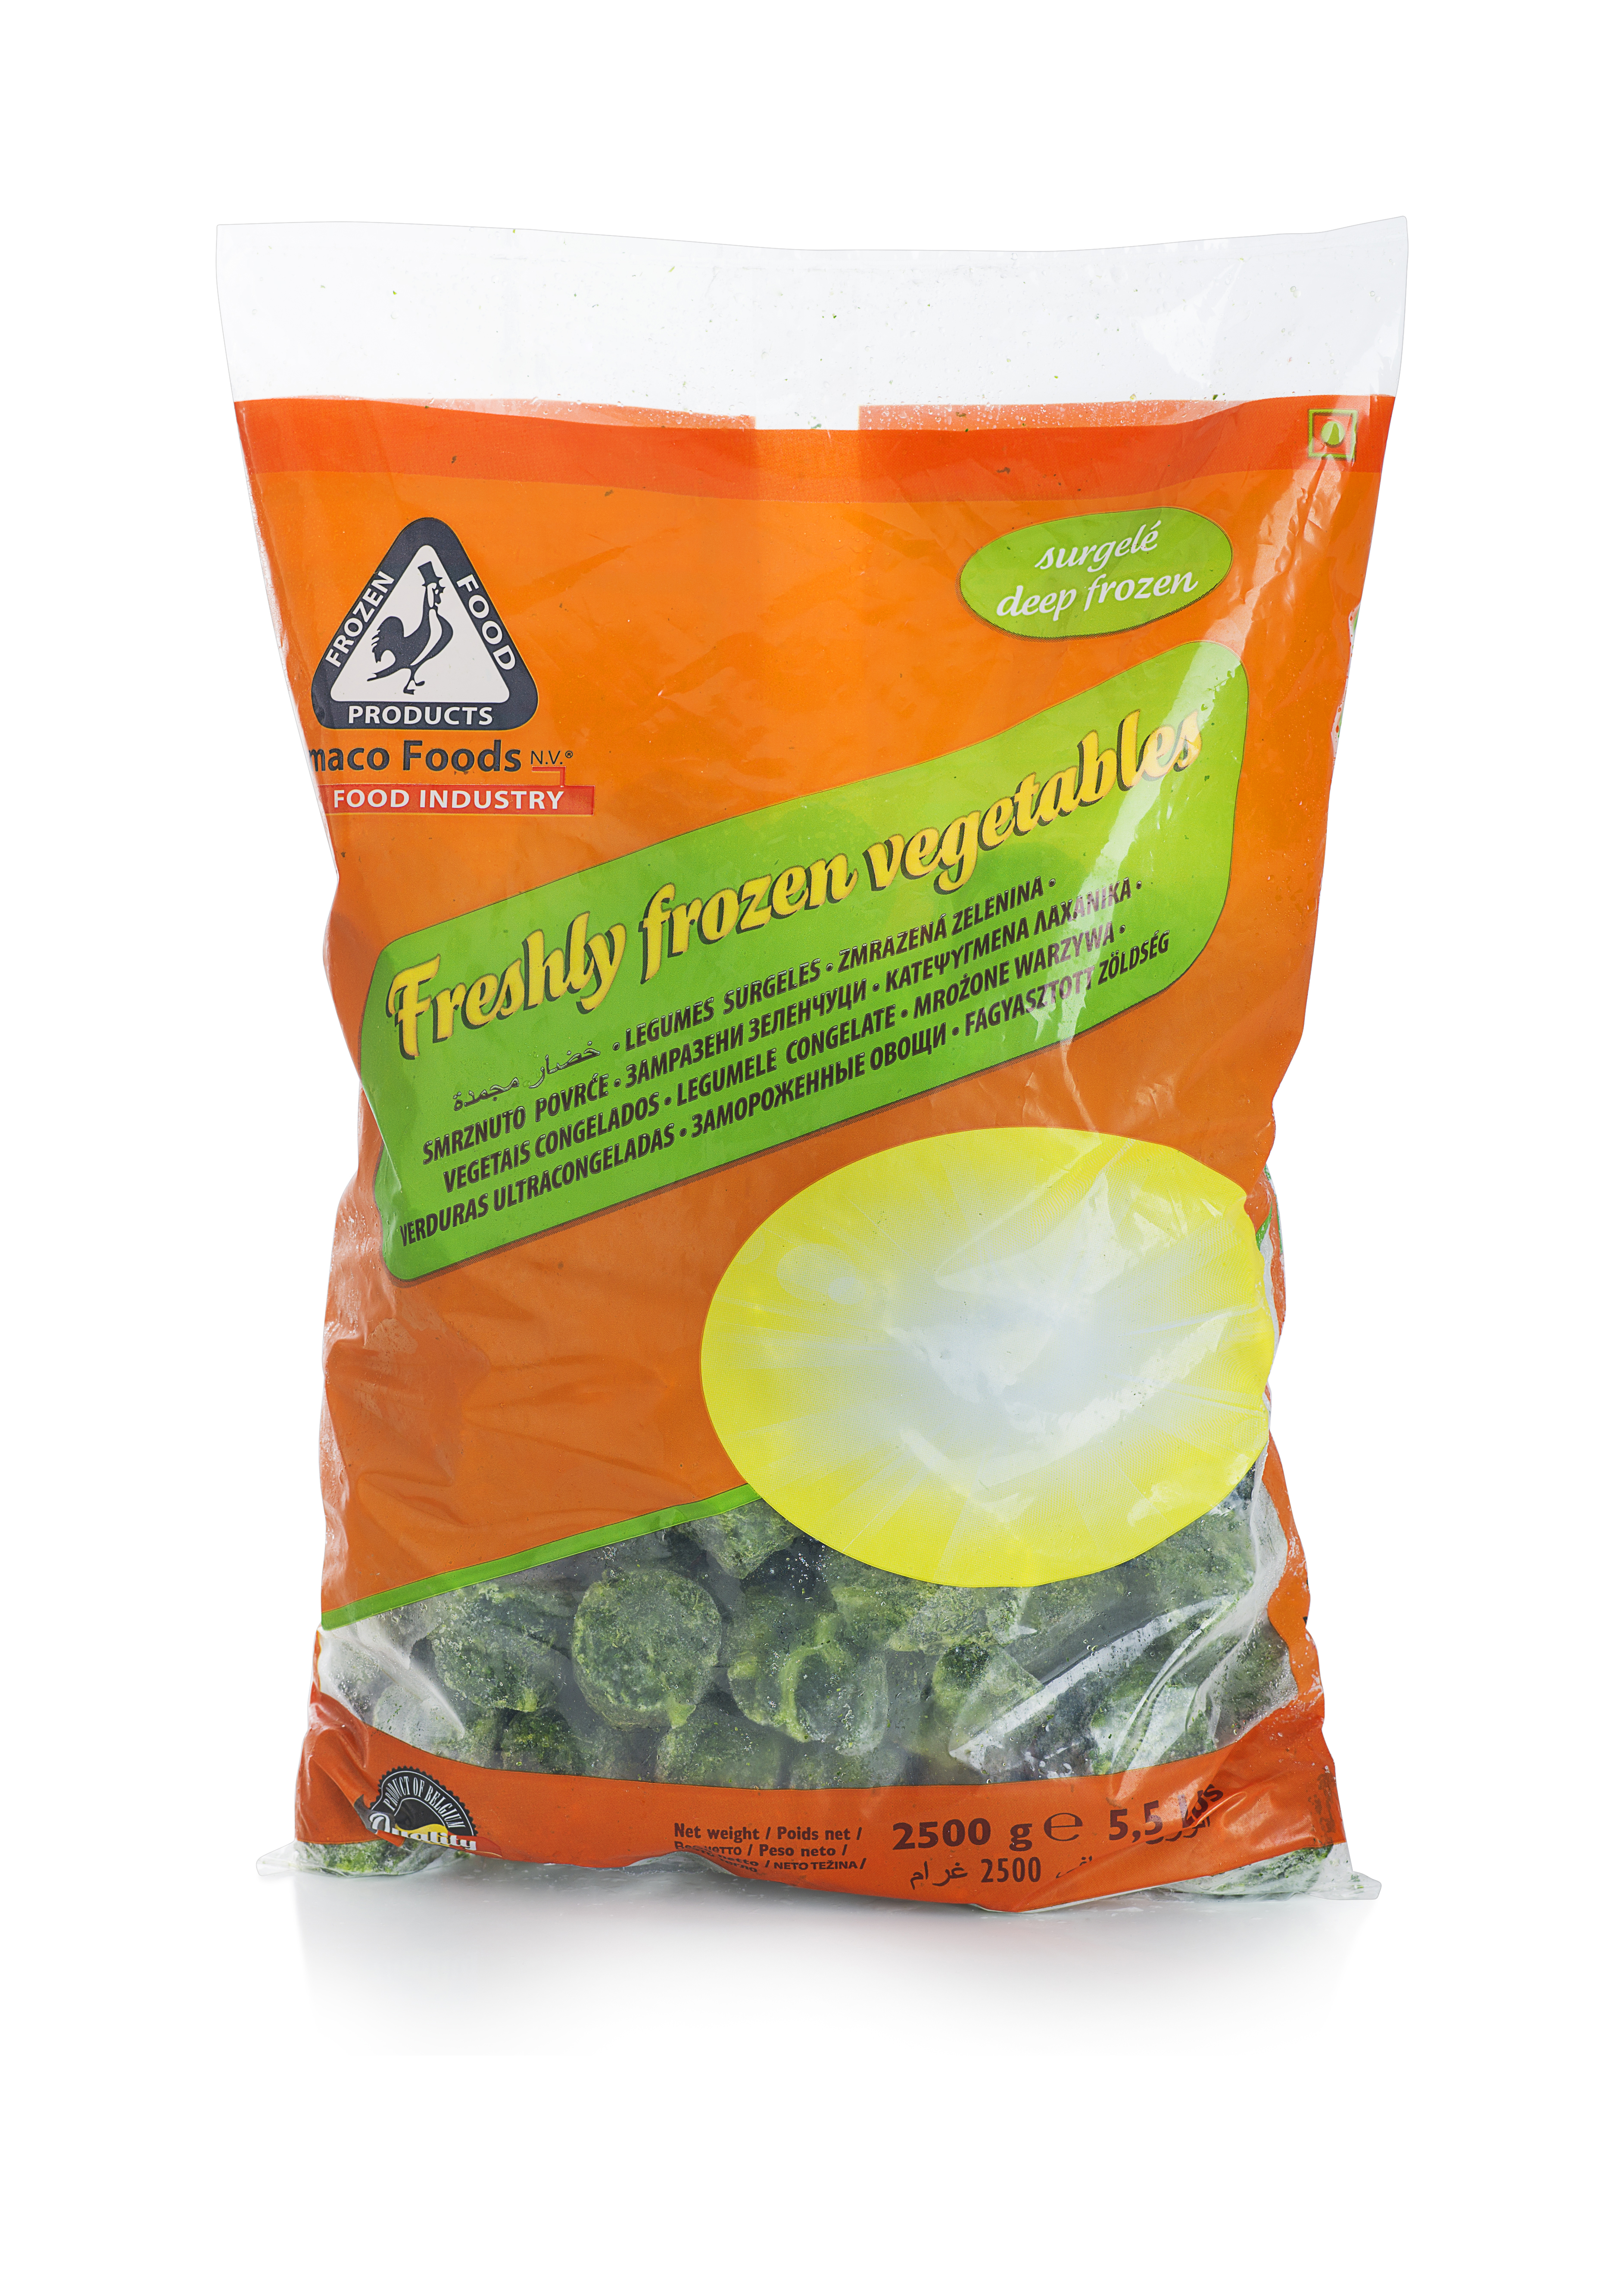 spinach damaco brand packaging